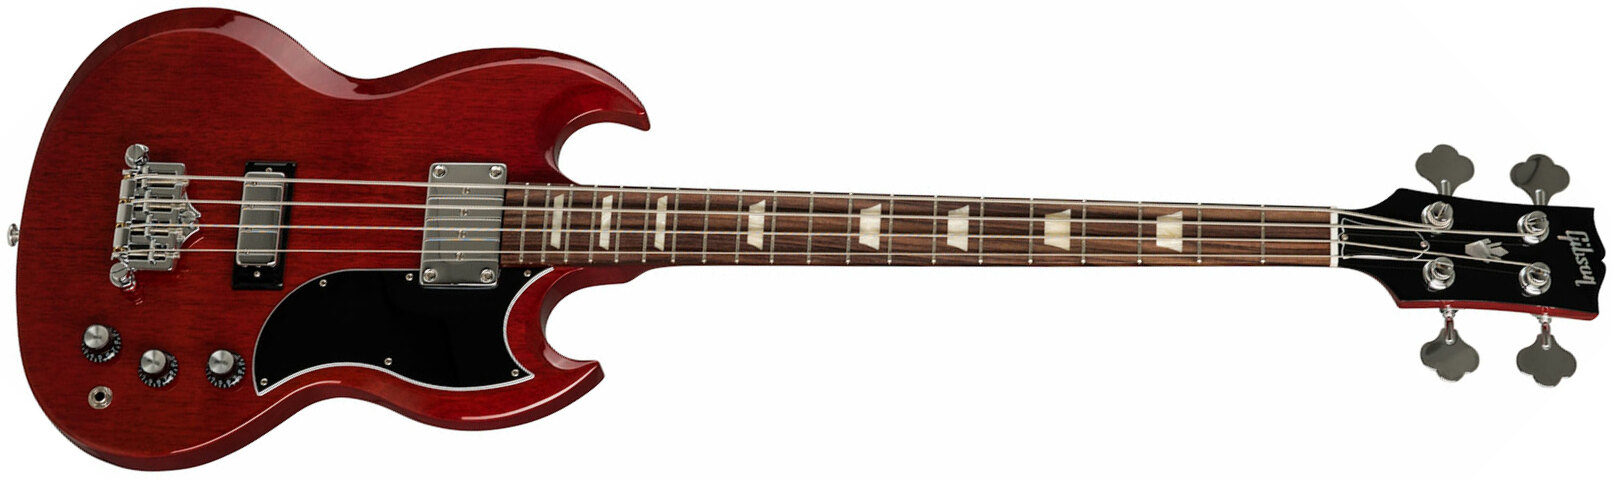 Gibson Sg Standard Bass Original Short Scale Rw - Heritage Cherry - Basse Électrique Solid Body - Main picture